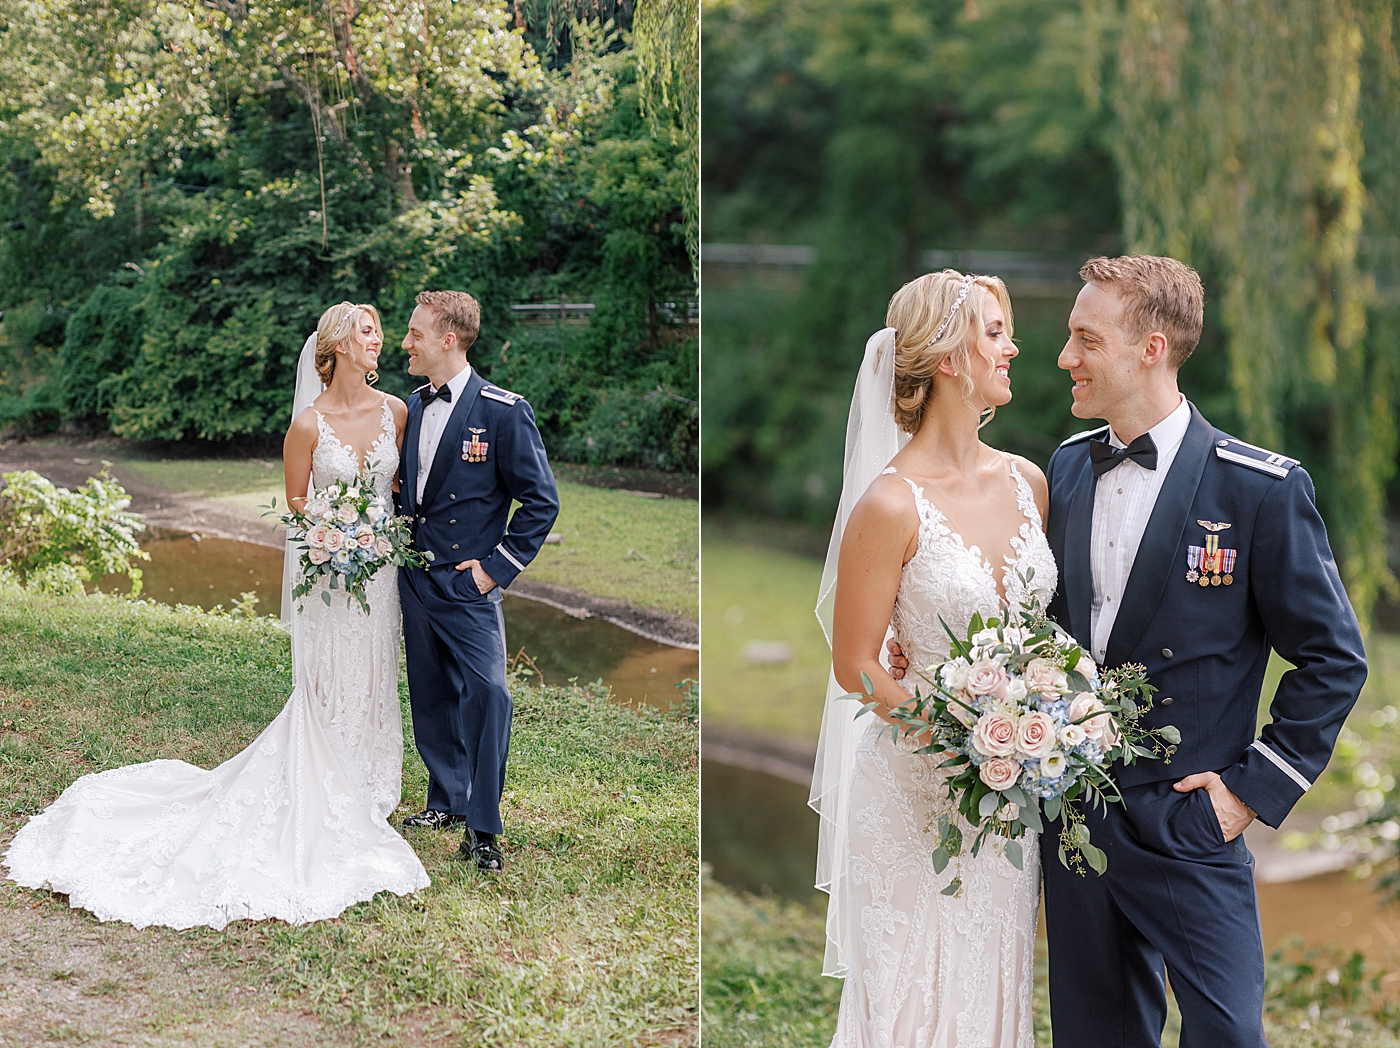 Bride and groom holding a bouquet near a creek | Image by Hope Helmuth Photography